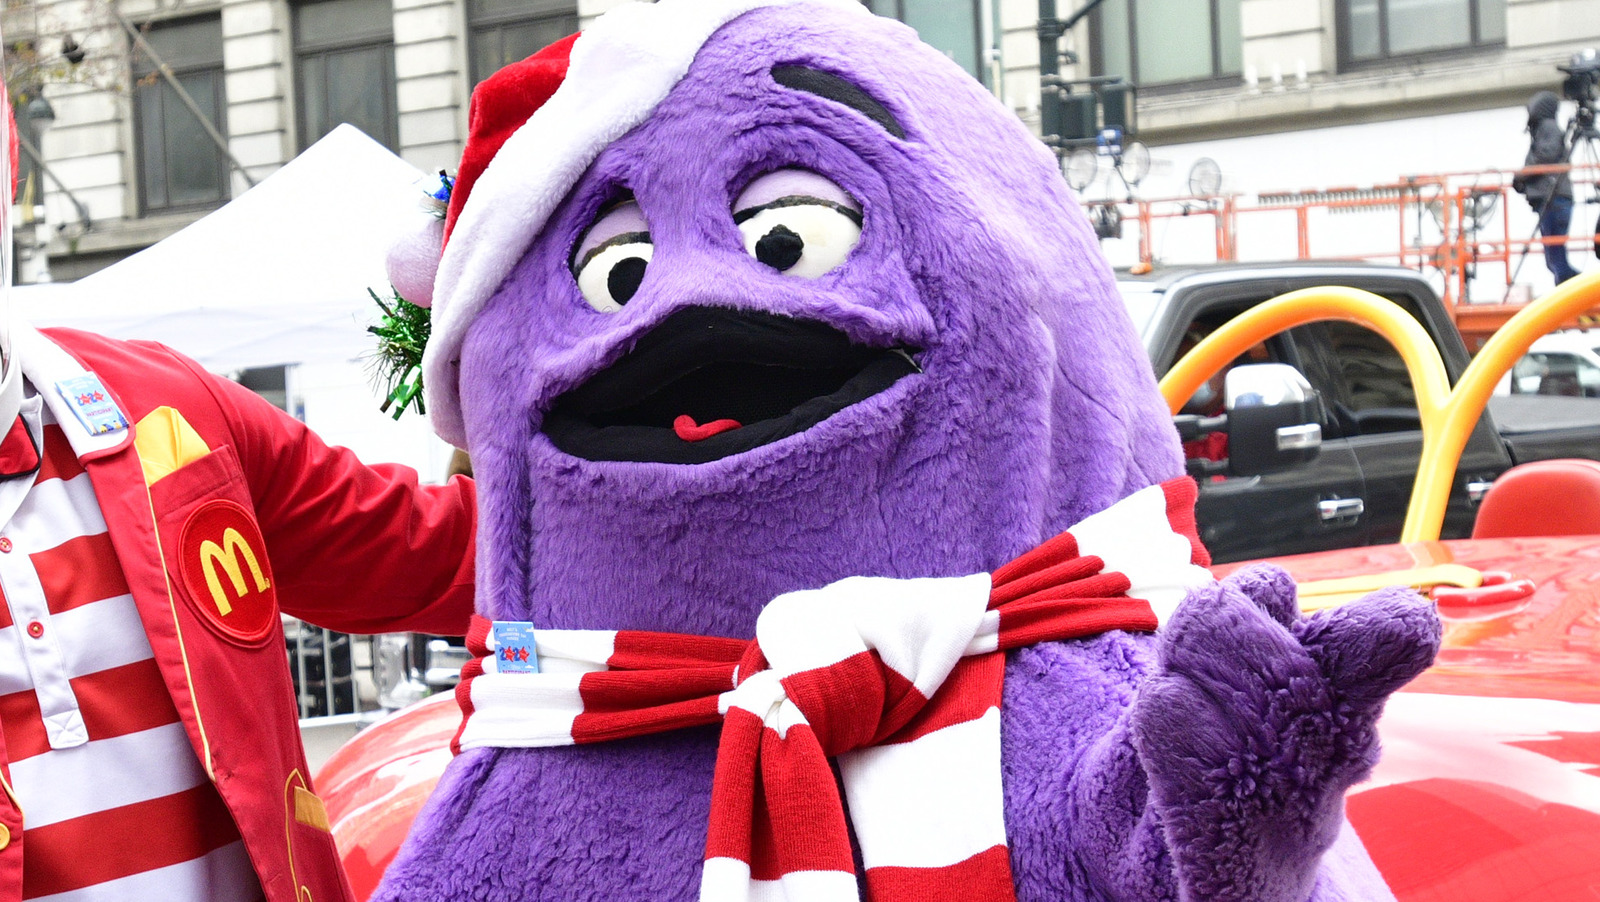 How Old Is Grimace And Why In The Purple Hell Is His Milkshake Scaring